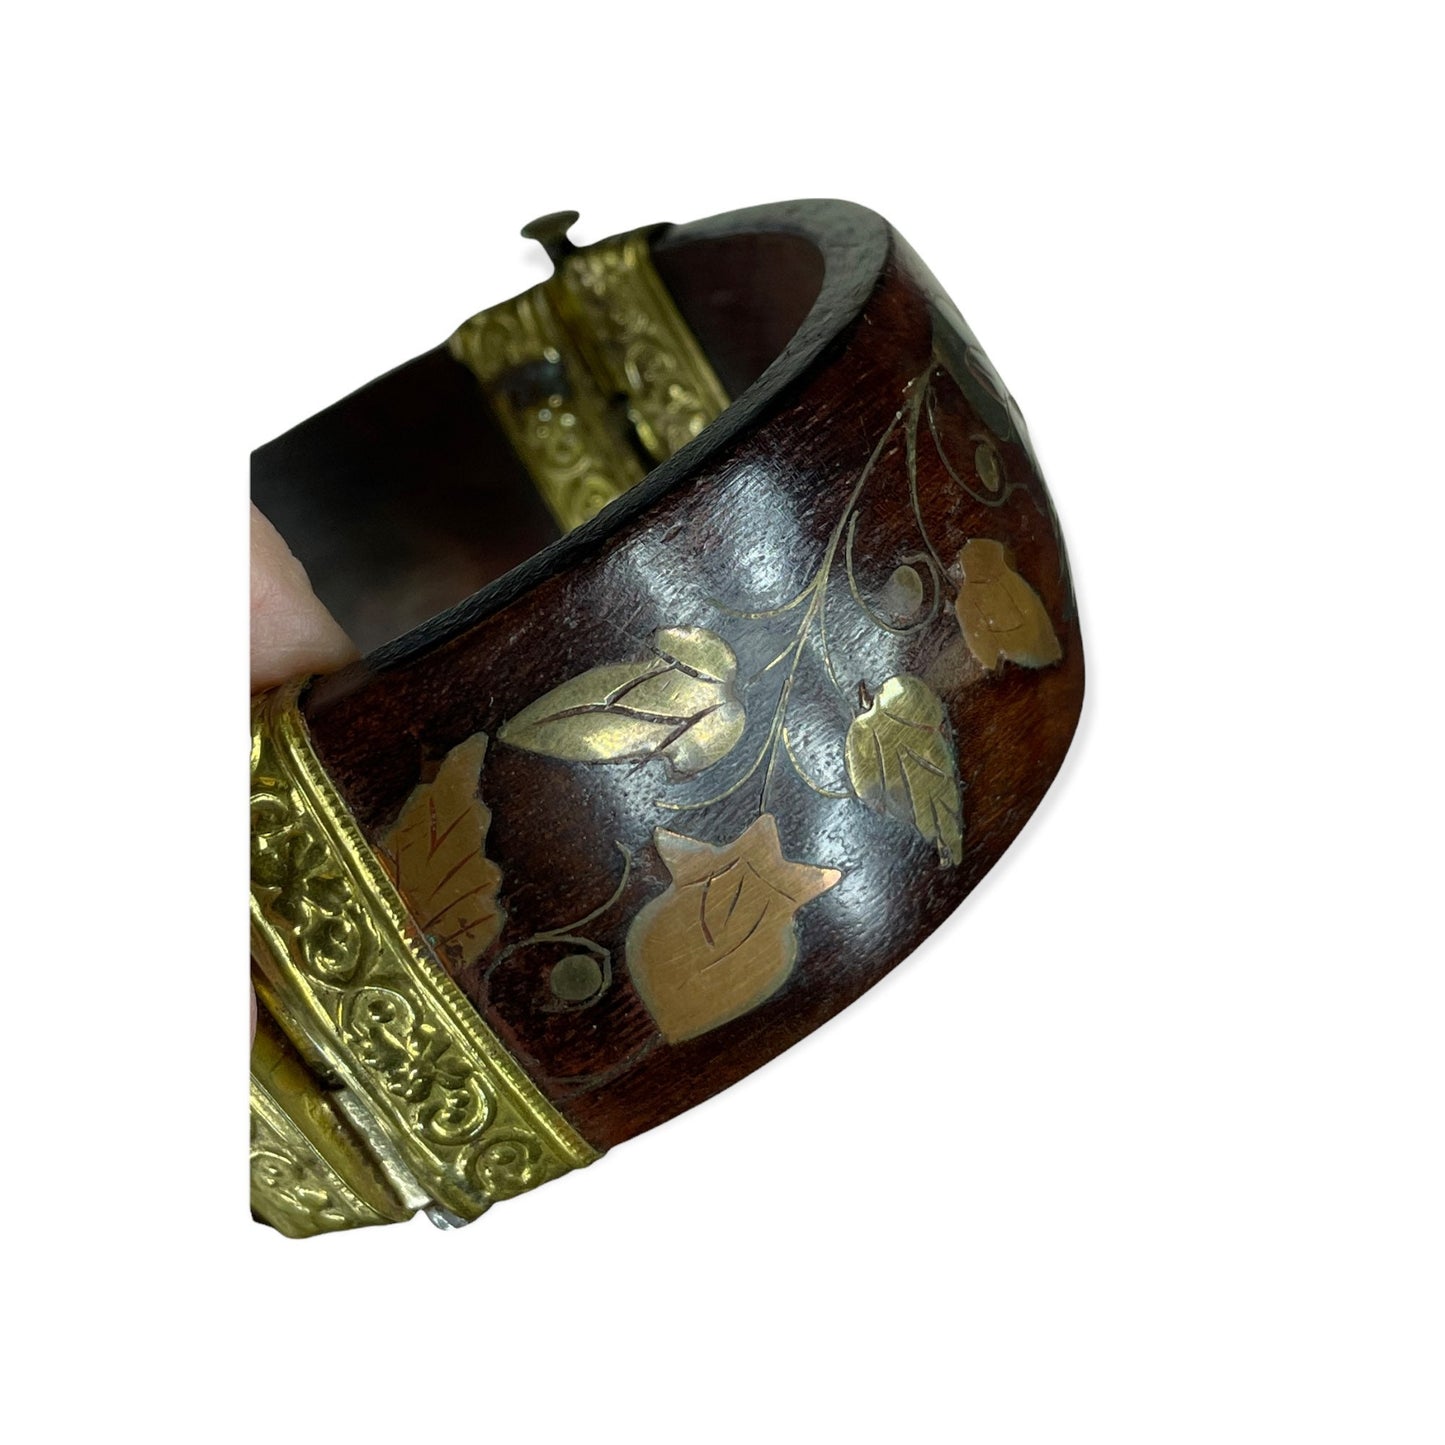 Wide wooden bangle bracelet with copper and brass floral inlay design